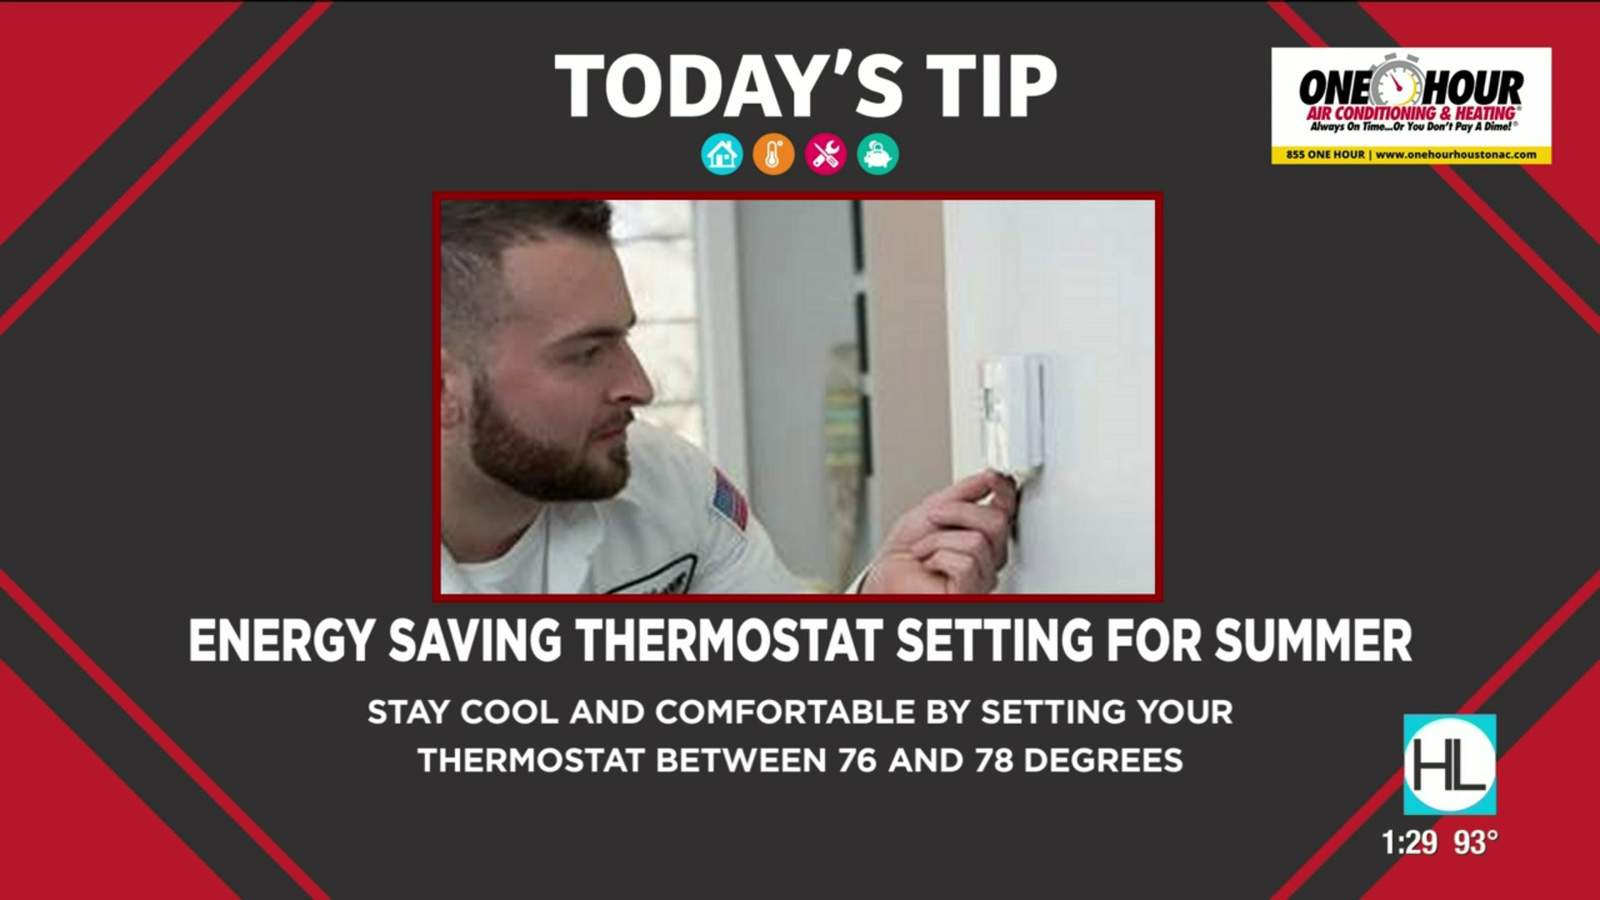 Tip Tuesday: How to save money on energy bills this summer